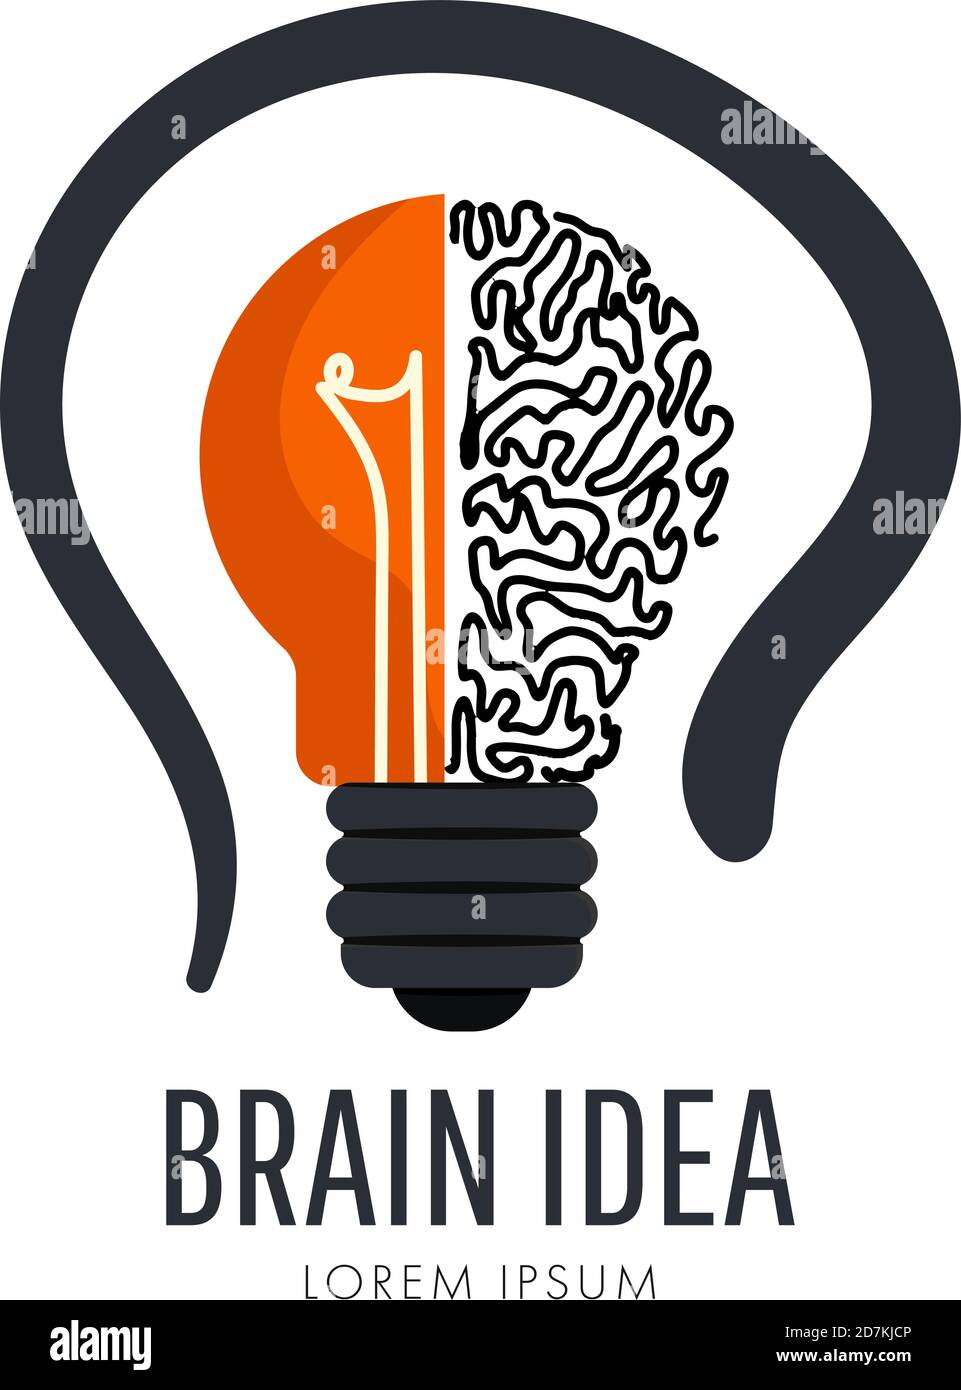 Brain idea. Creative composition of half brain with smart bulb icon logo isolated on white background Stock Vector